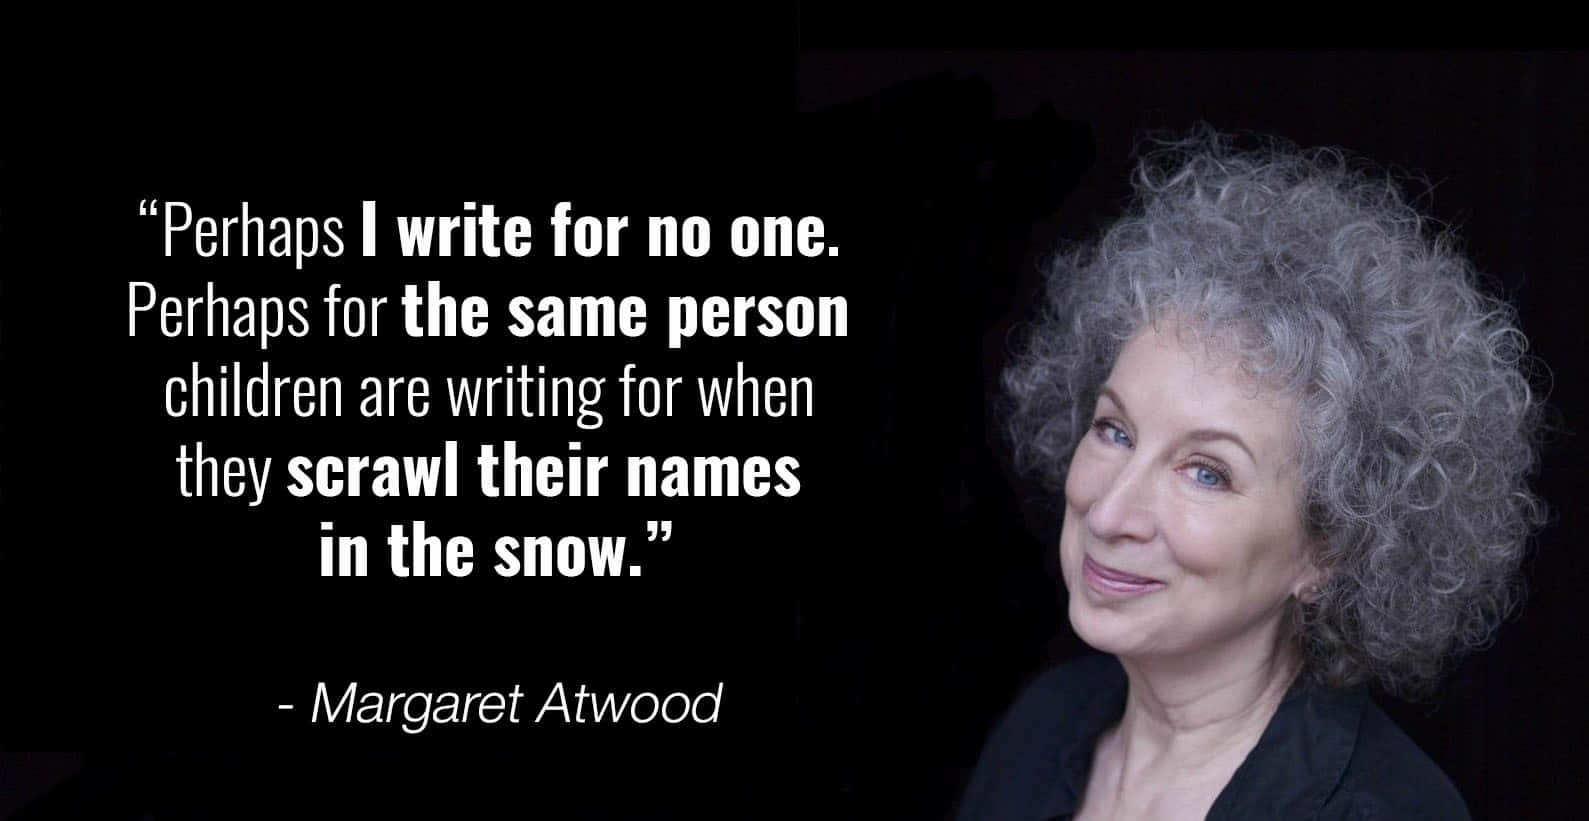 Margaret Atwood Writing Quote Wallpaper